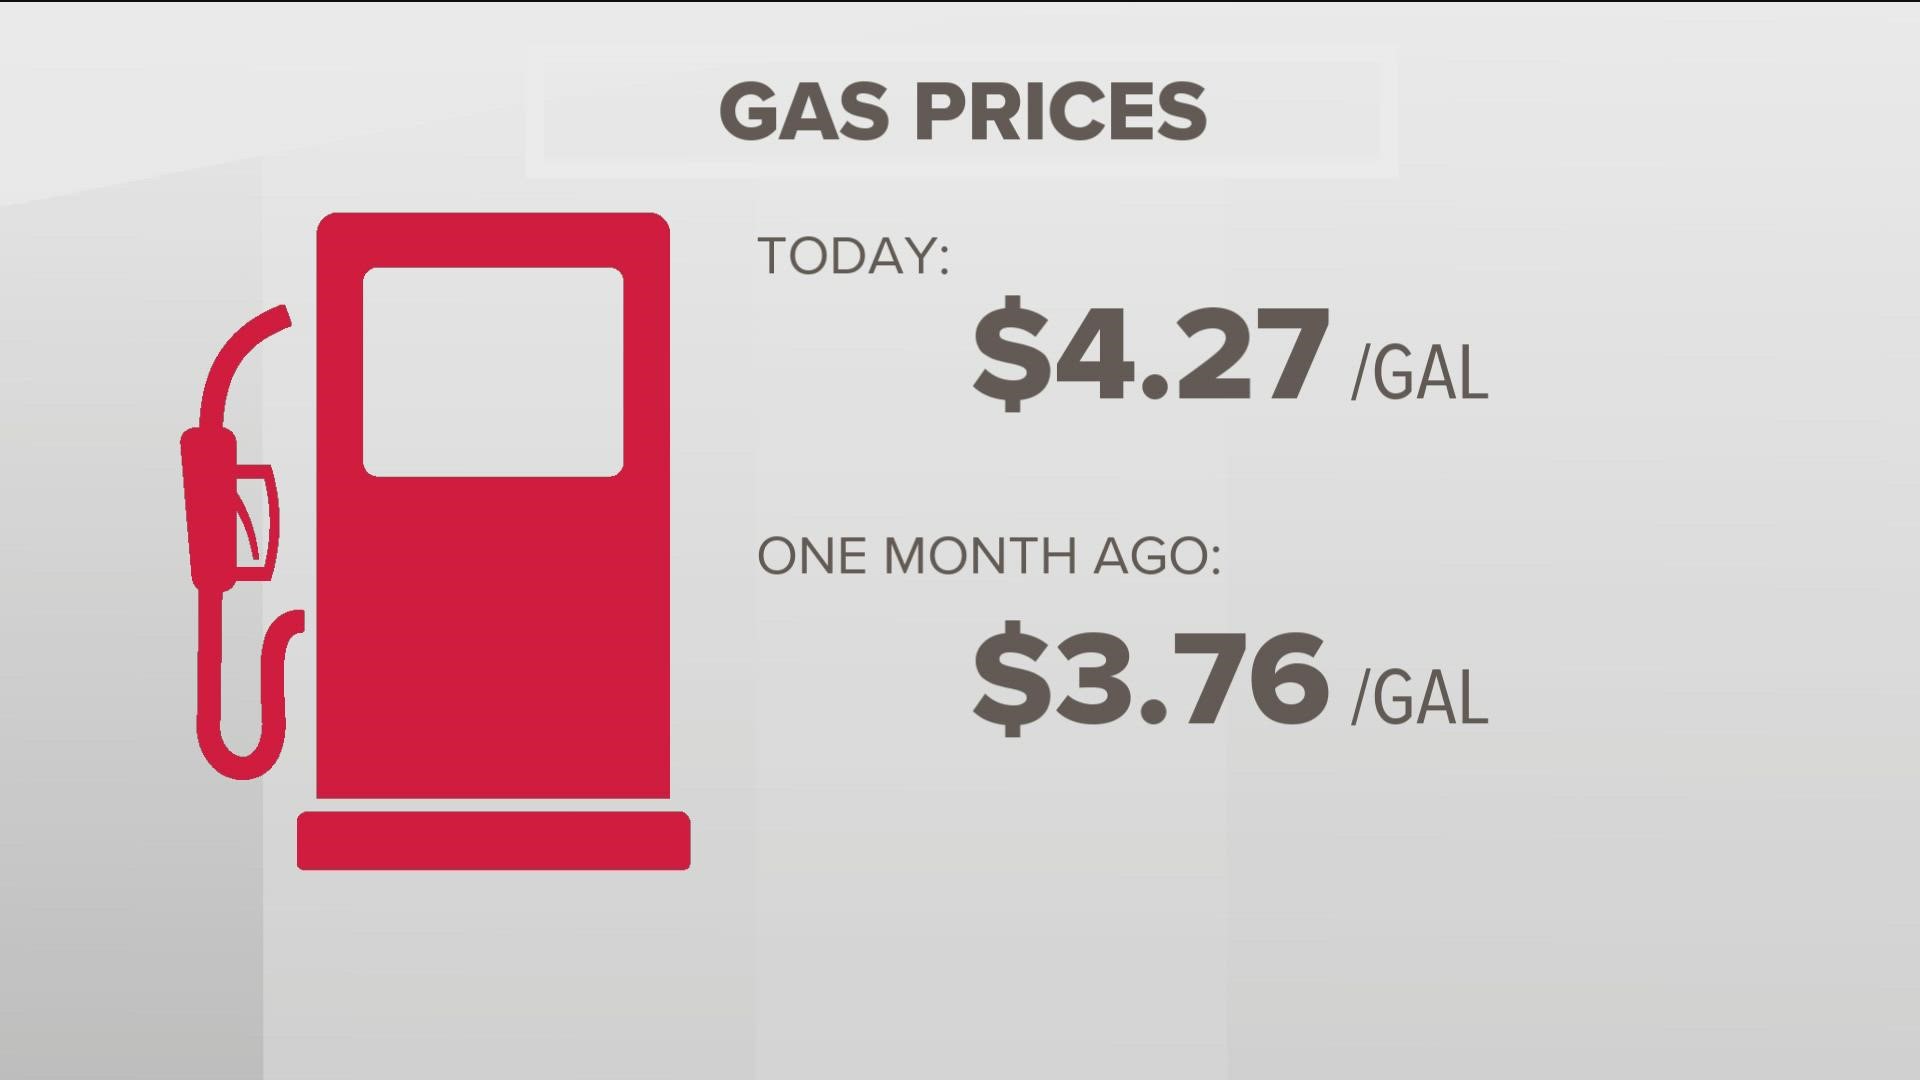 The price is $.51/gallon more than it was last month.